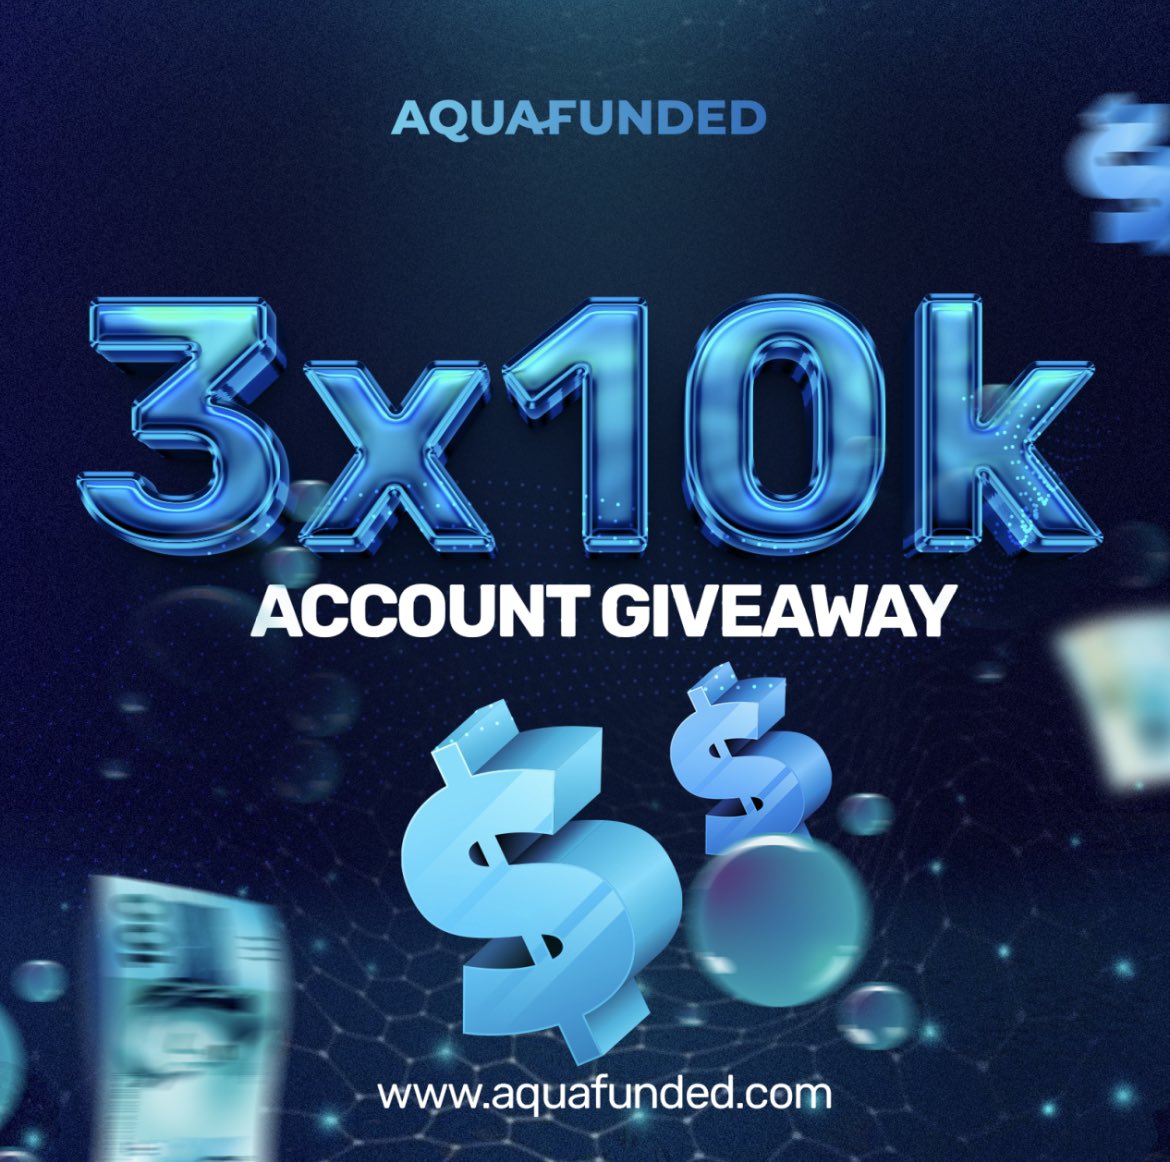 🚨 GIVEAWAY ALERT 🚨 🎁 3X $10k Account Giveaway 🎁 To enter: ✅ Follow @tradericch | @AquaFunded | @tradewithhuncho | @HighbluesF ✅ Join our vibrant community: t.me/tradericch231 ✅ Like, Retweet & Tag your favorite traders Winners will be announced in 72hrs⏰